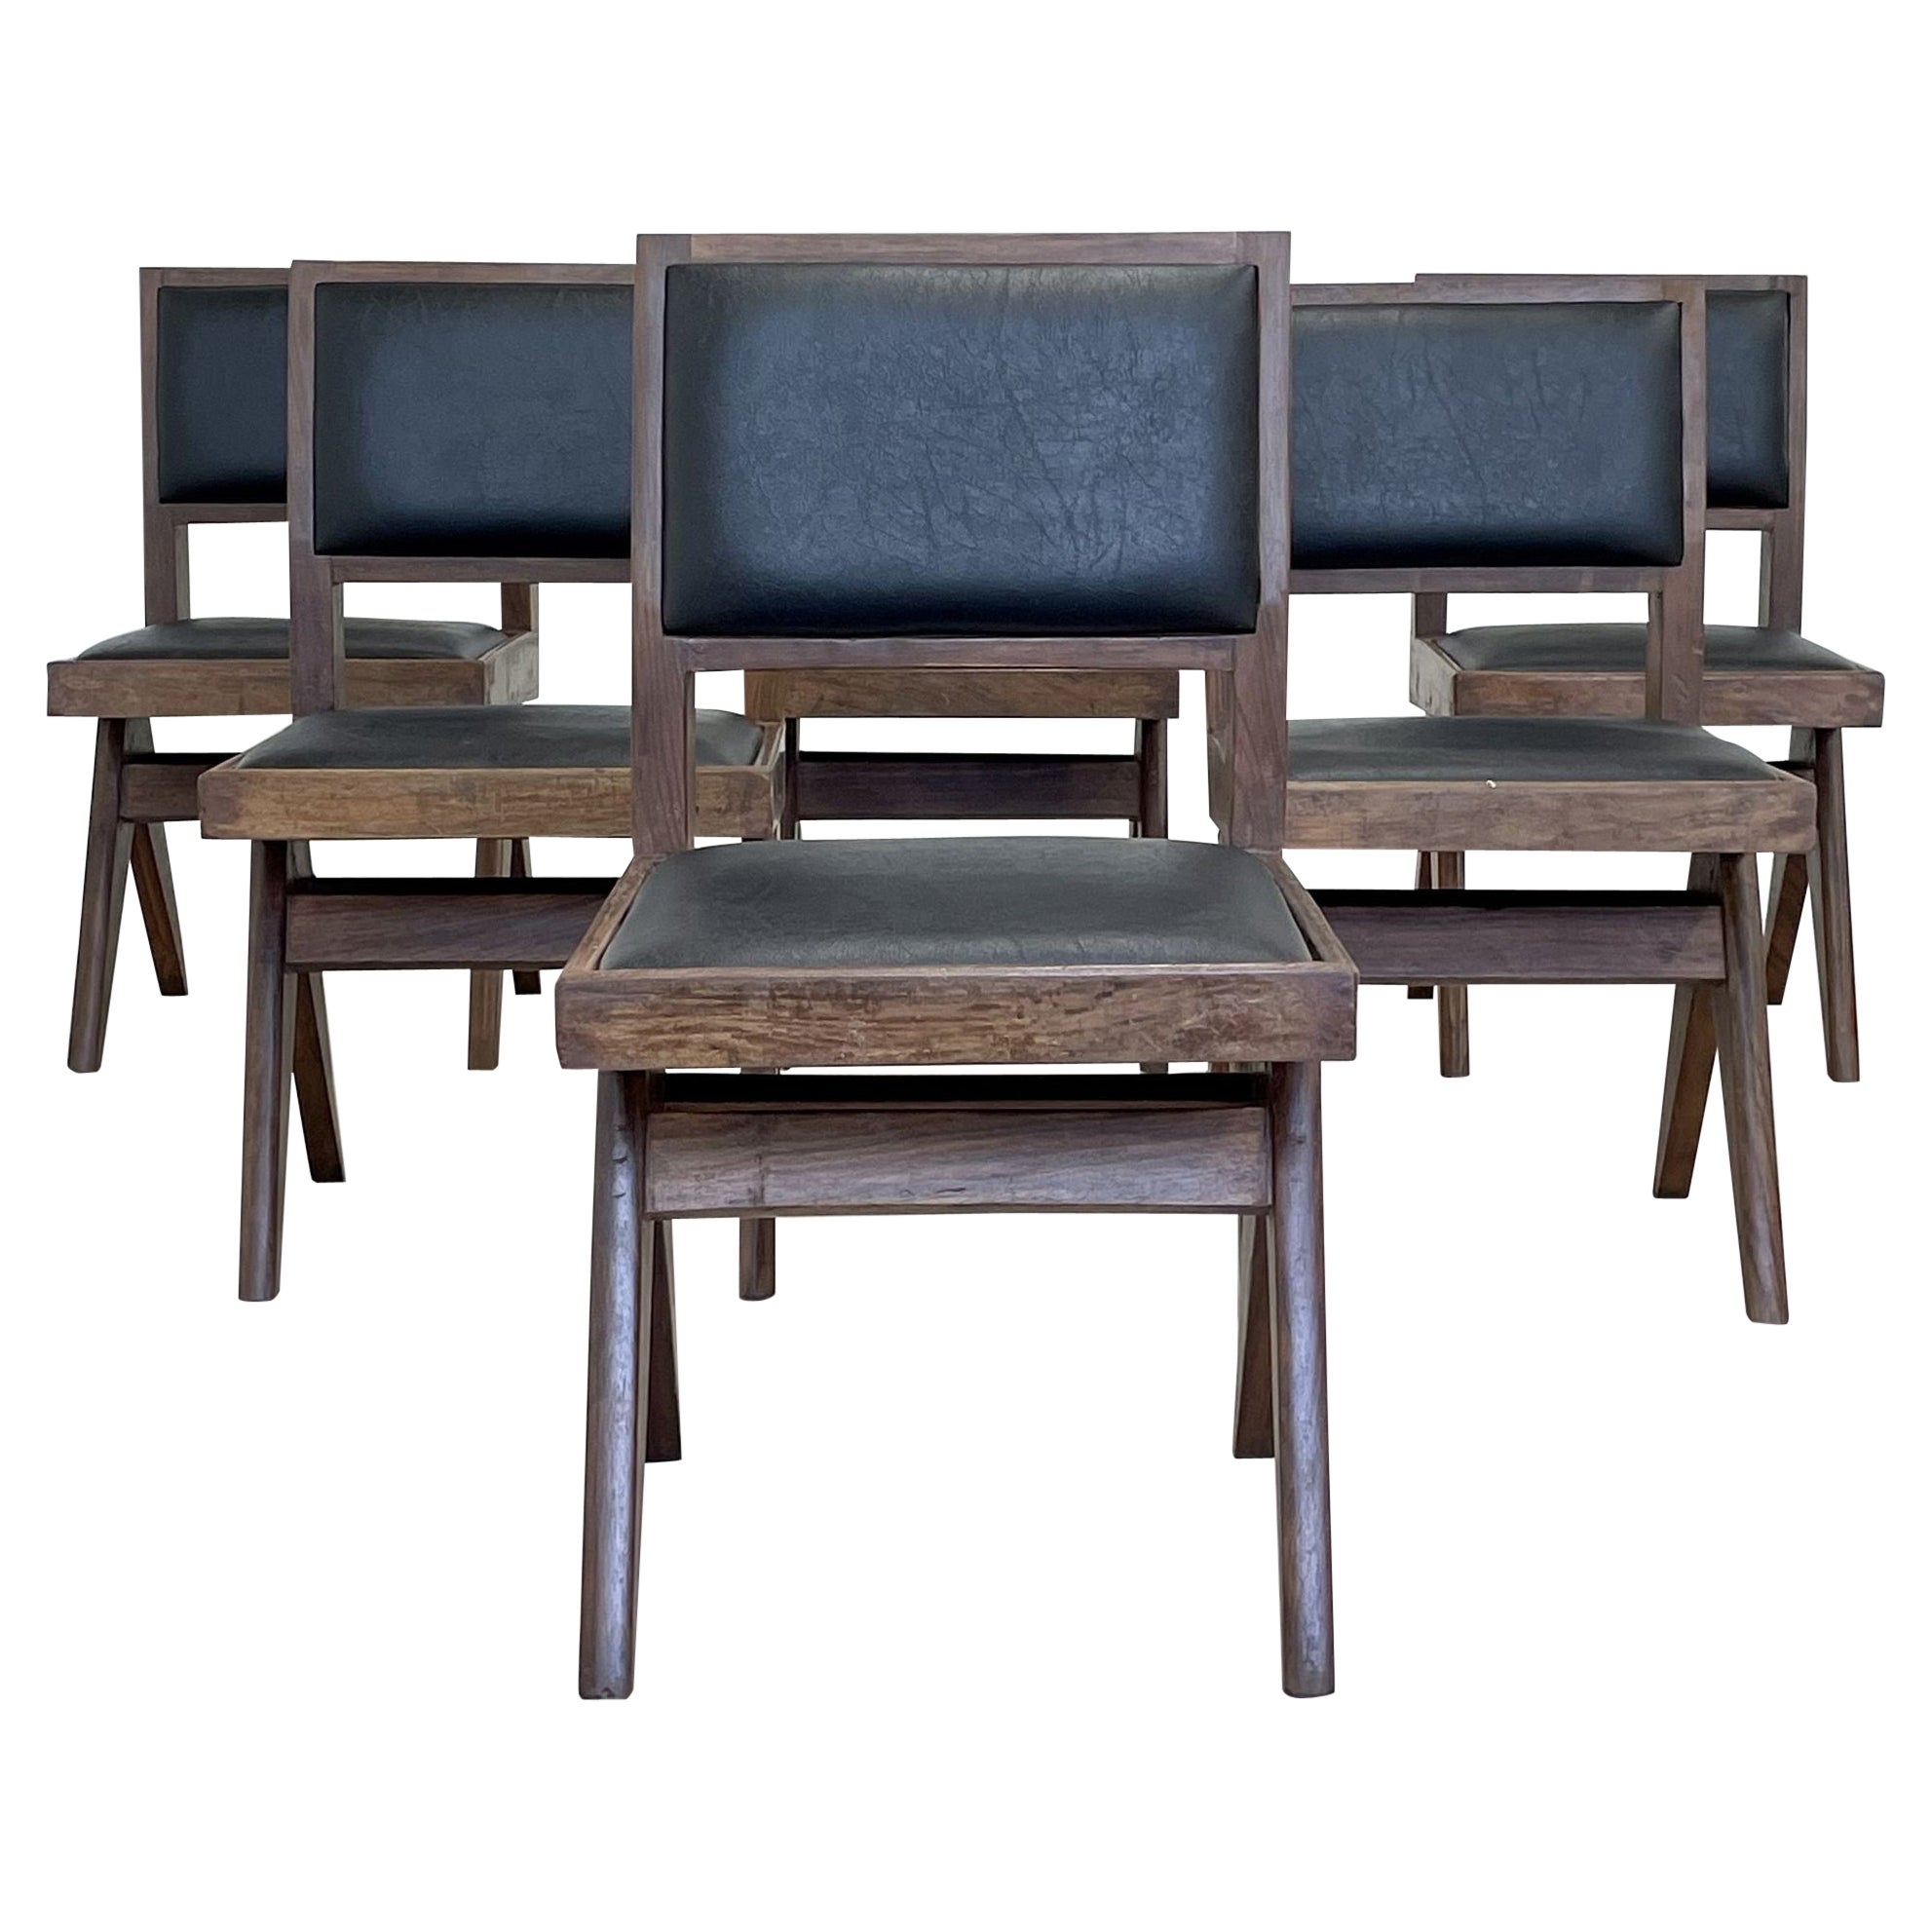 Set Six Authentic Upholstered Armless Dining / Side Chairs, Mid-Century Modern